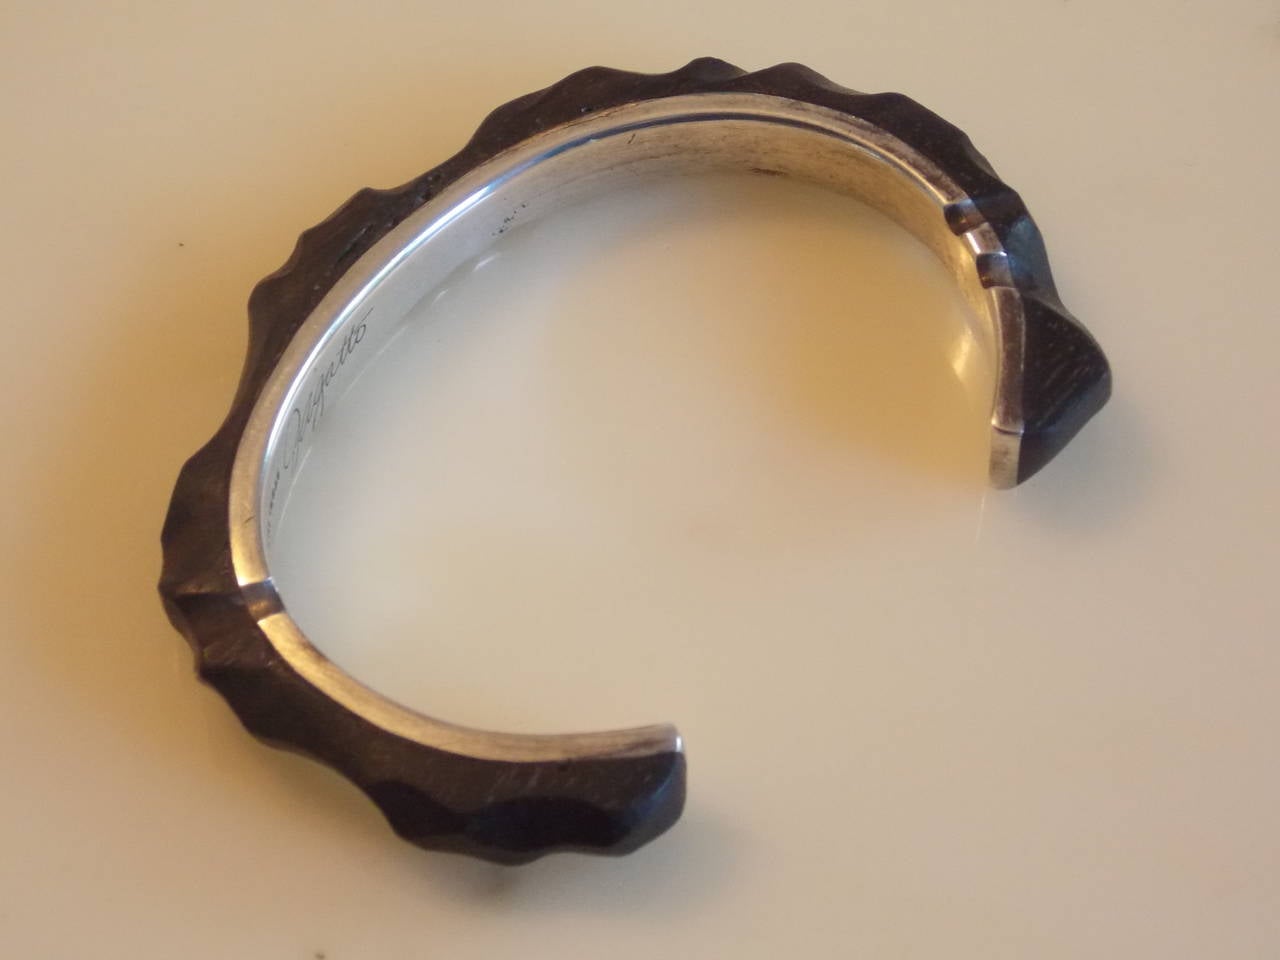 1934-2013.
This bracelet was acquired directly from Mr. Gatto roughly about eight years ago at a jewelry show at the Santa Monica Civic Center in California.
It's made of carved ebony wood with sterling silver.
Mr. Gatto said that the wood